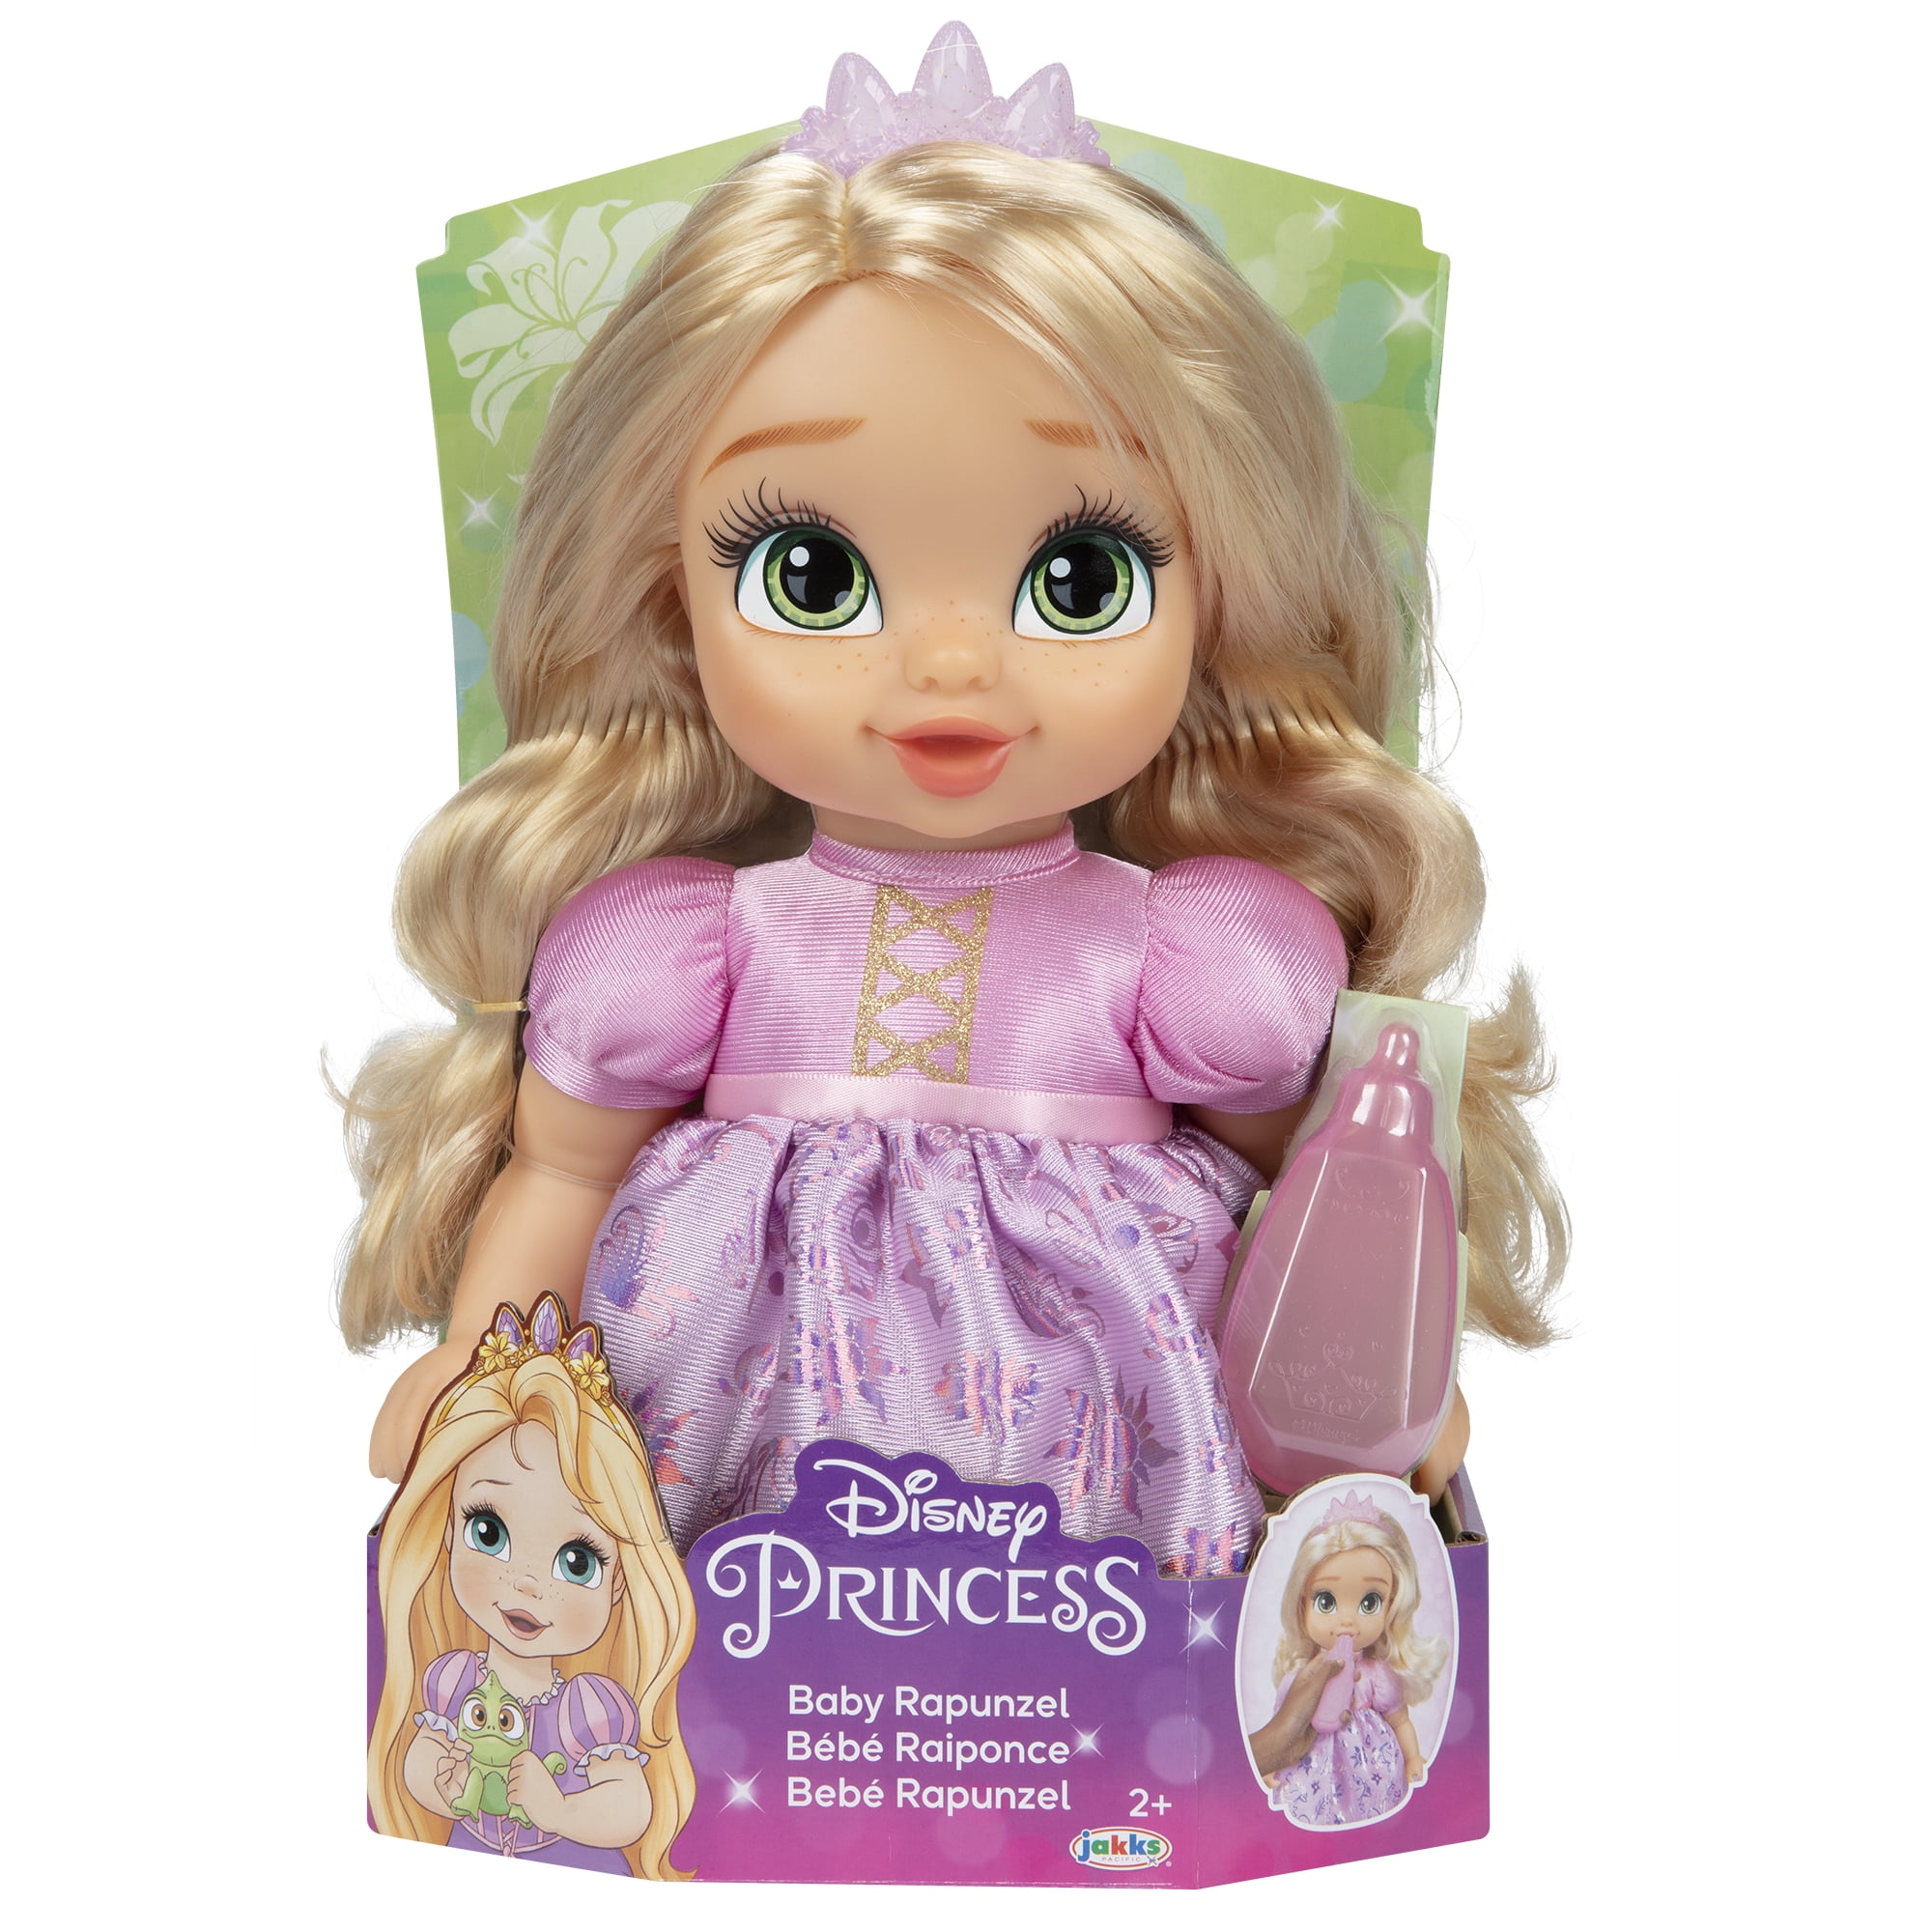 Disney Princess Deluxe Rapunzel Baby Doll Includes Tiara and Bottle for Children Ages 2+